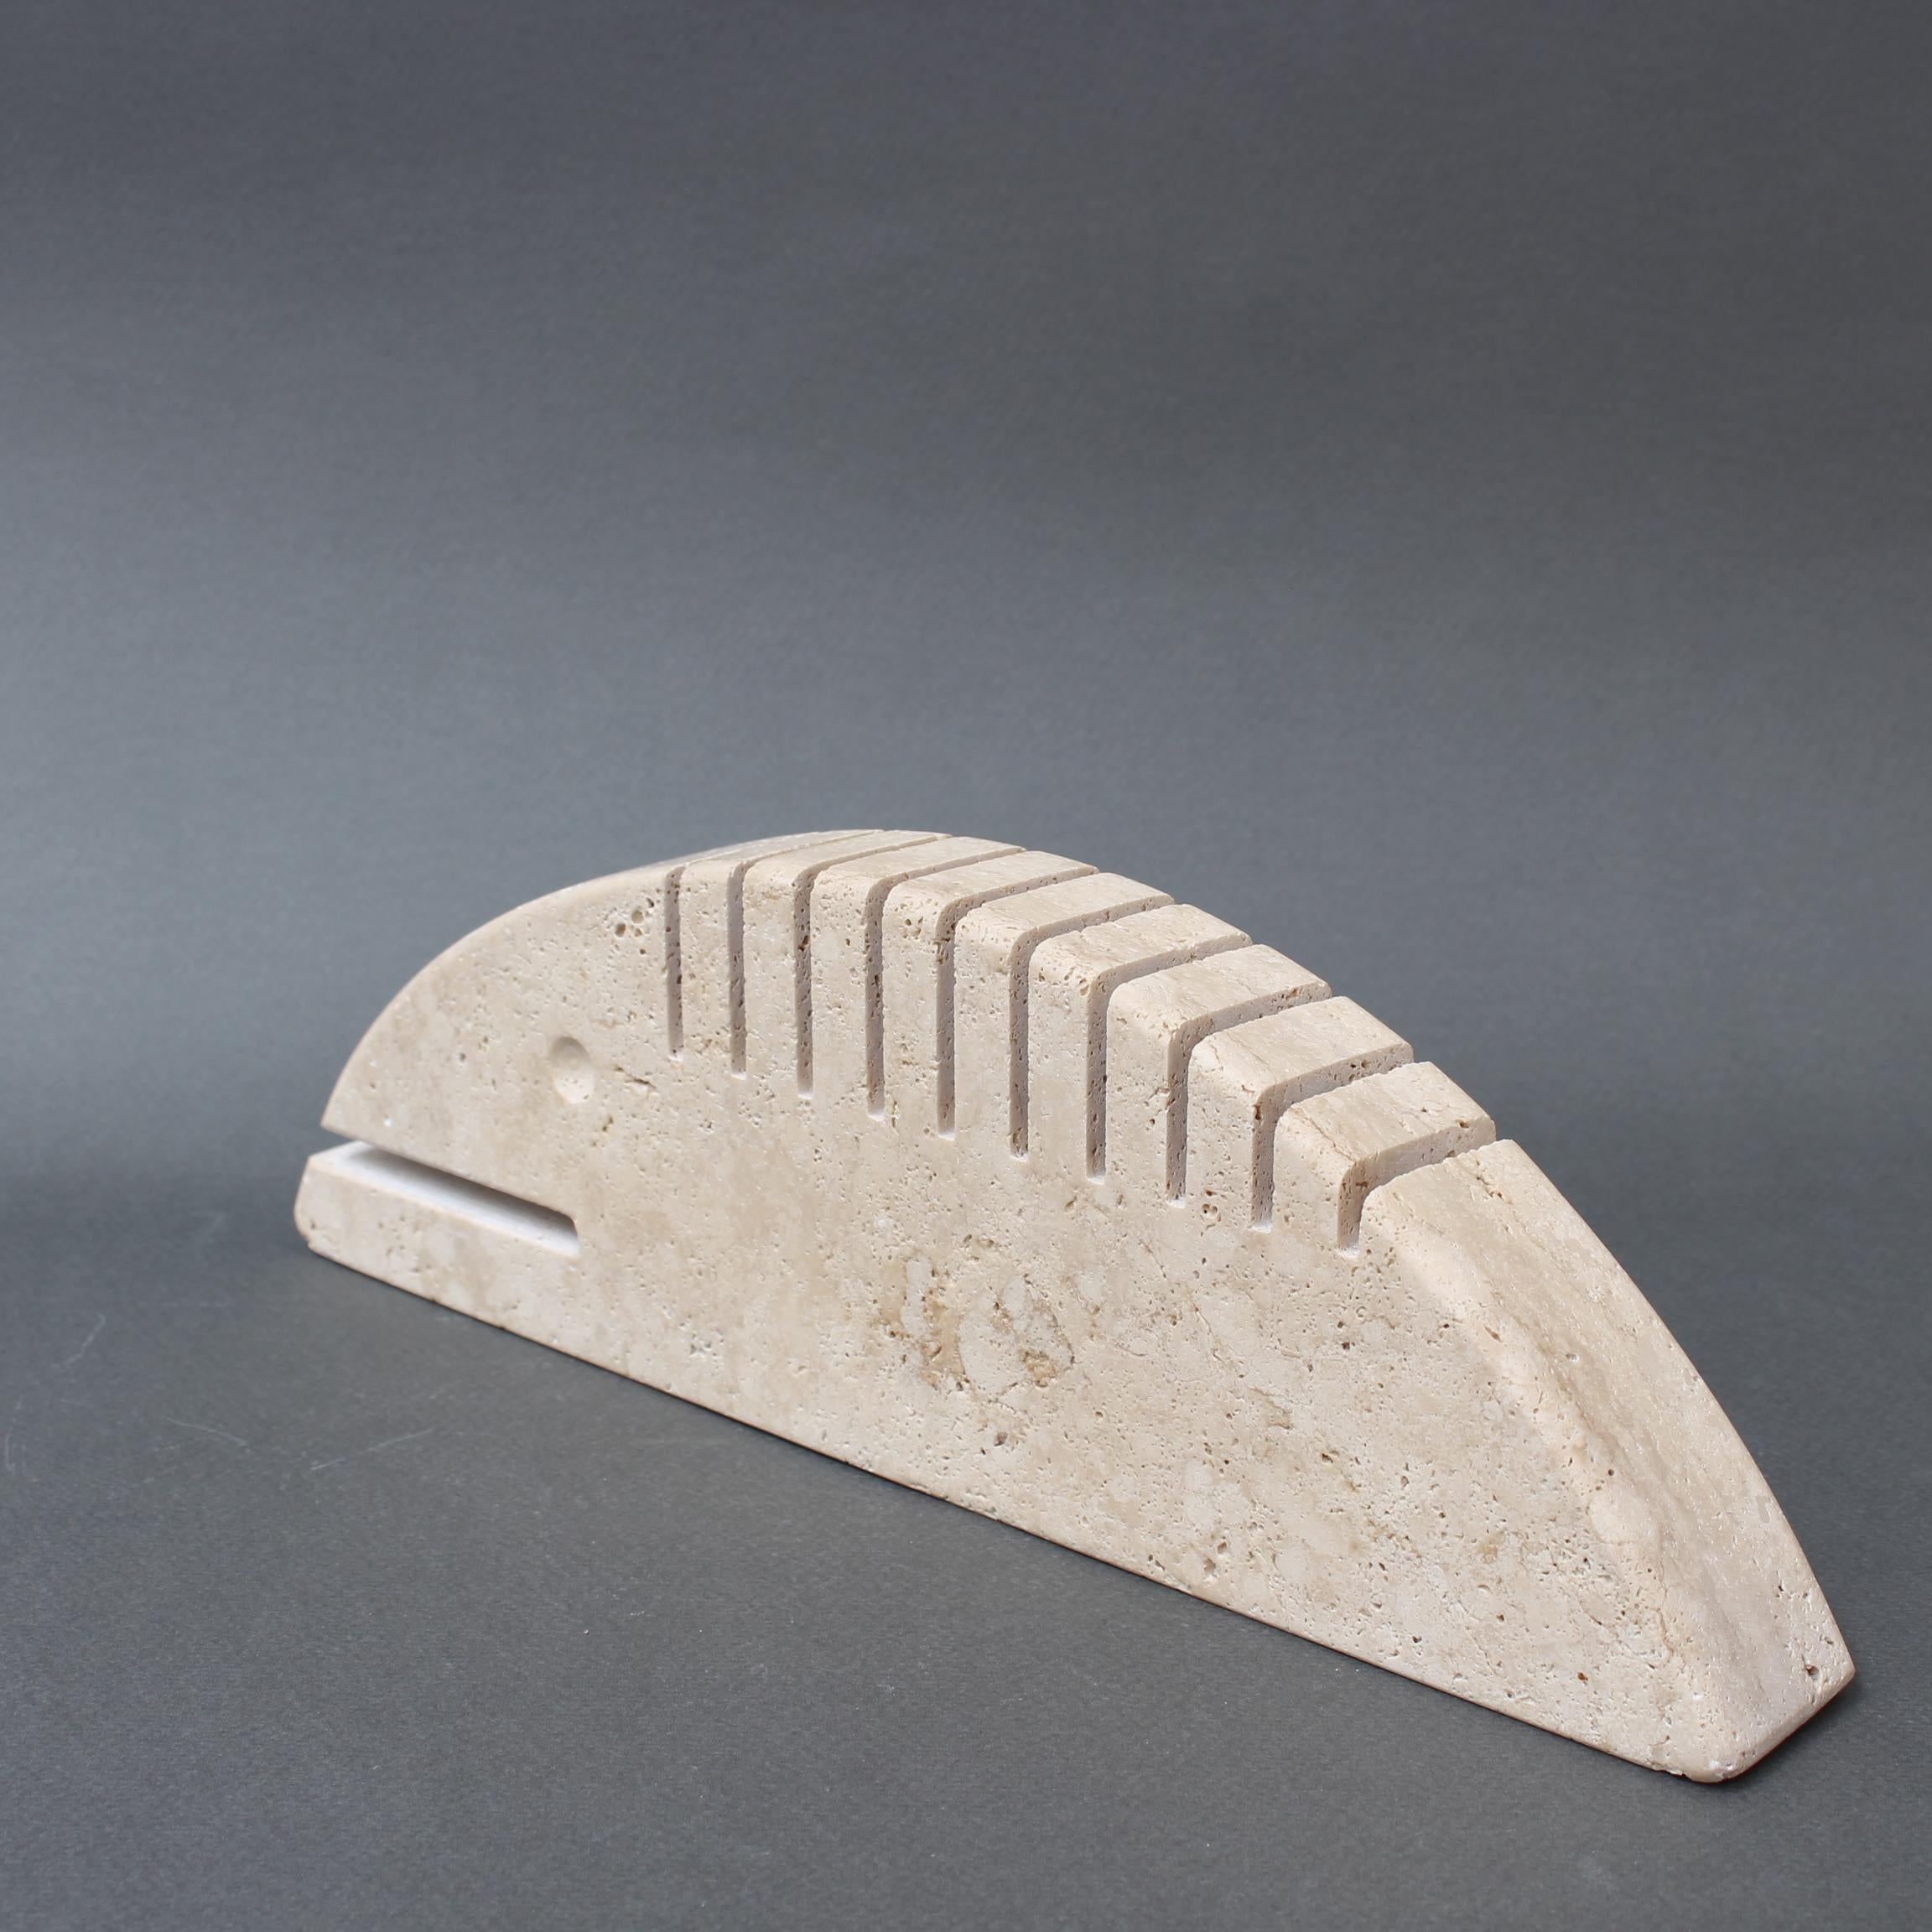 Vintage Italian travertine zoomorphic sculpture and card or letter holder by Mannelli Bros (circa 1970s). Designed by Italian brothers, Fratelli Mannelli, this charming piece has loads of character and will delight collectors and those who love